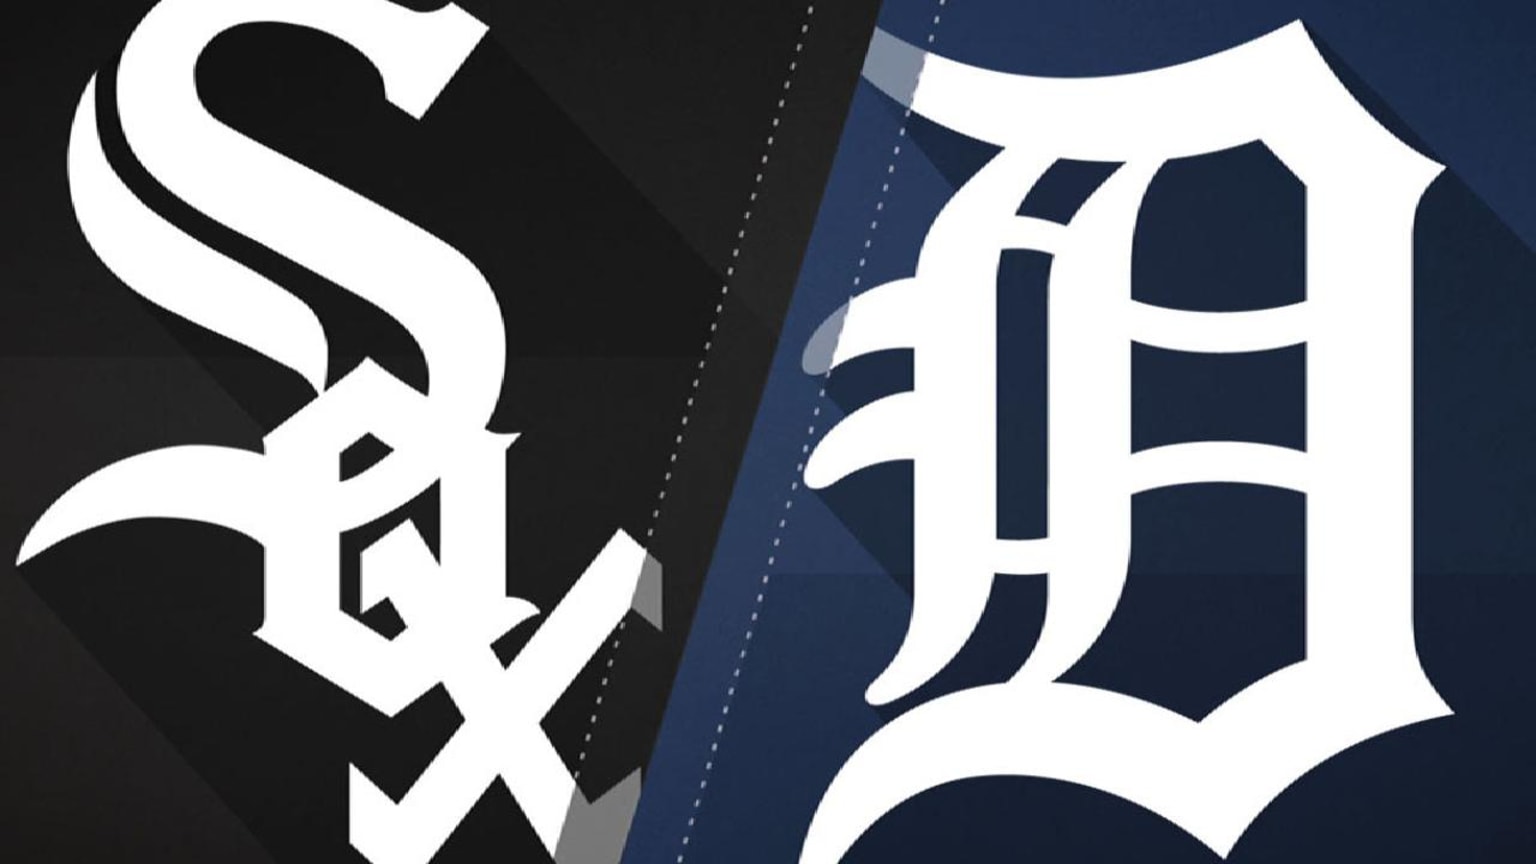 White Sox 4, Tigers 2: A late error sinks the Tigers - Bless You Boys